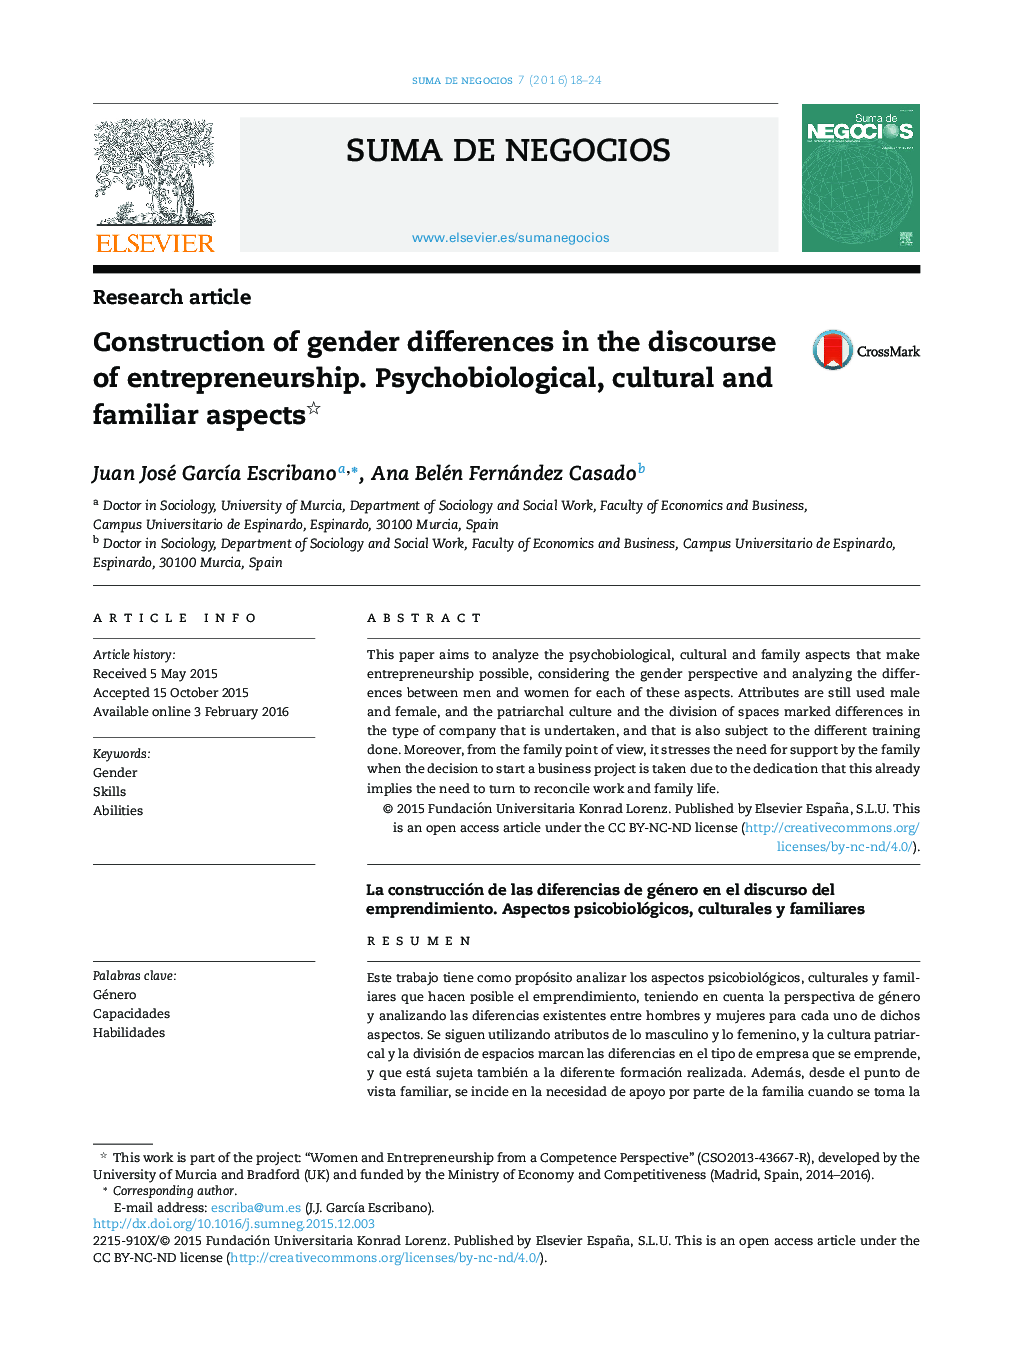 Construction of gender differences in the discourse of entrepreneurship. Psychobiological, cultural and familiar aspects 